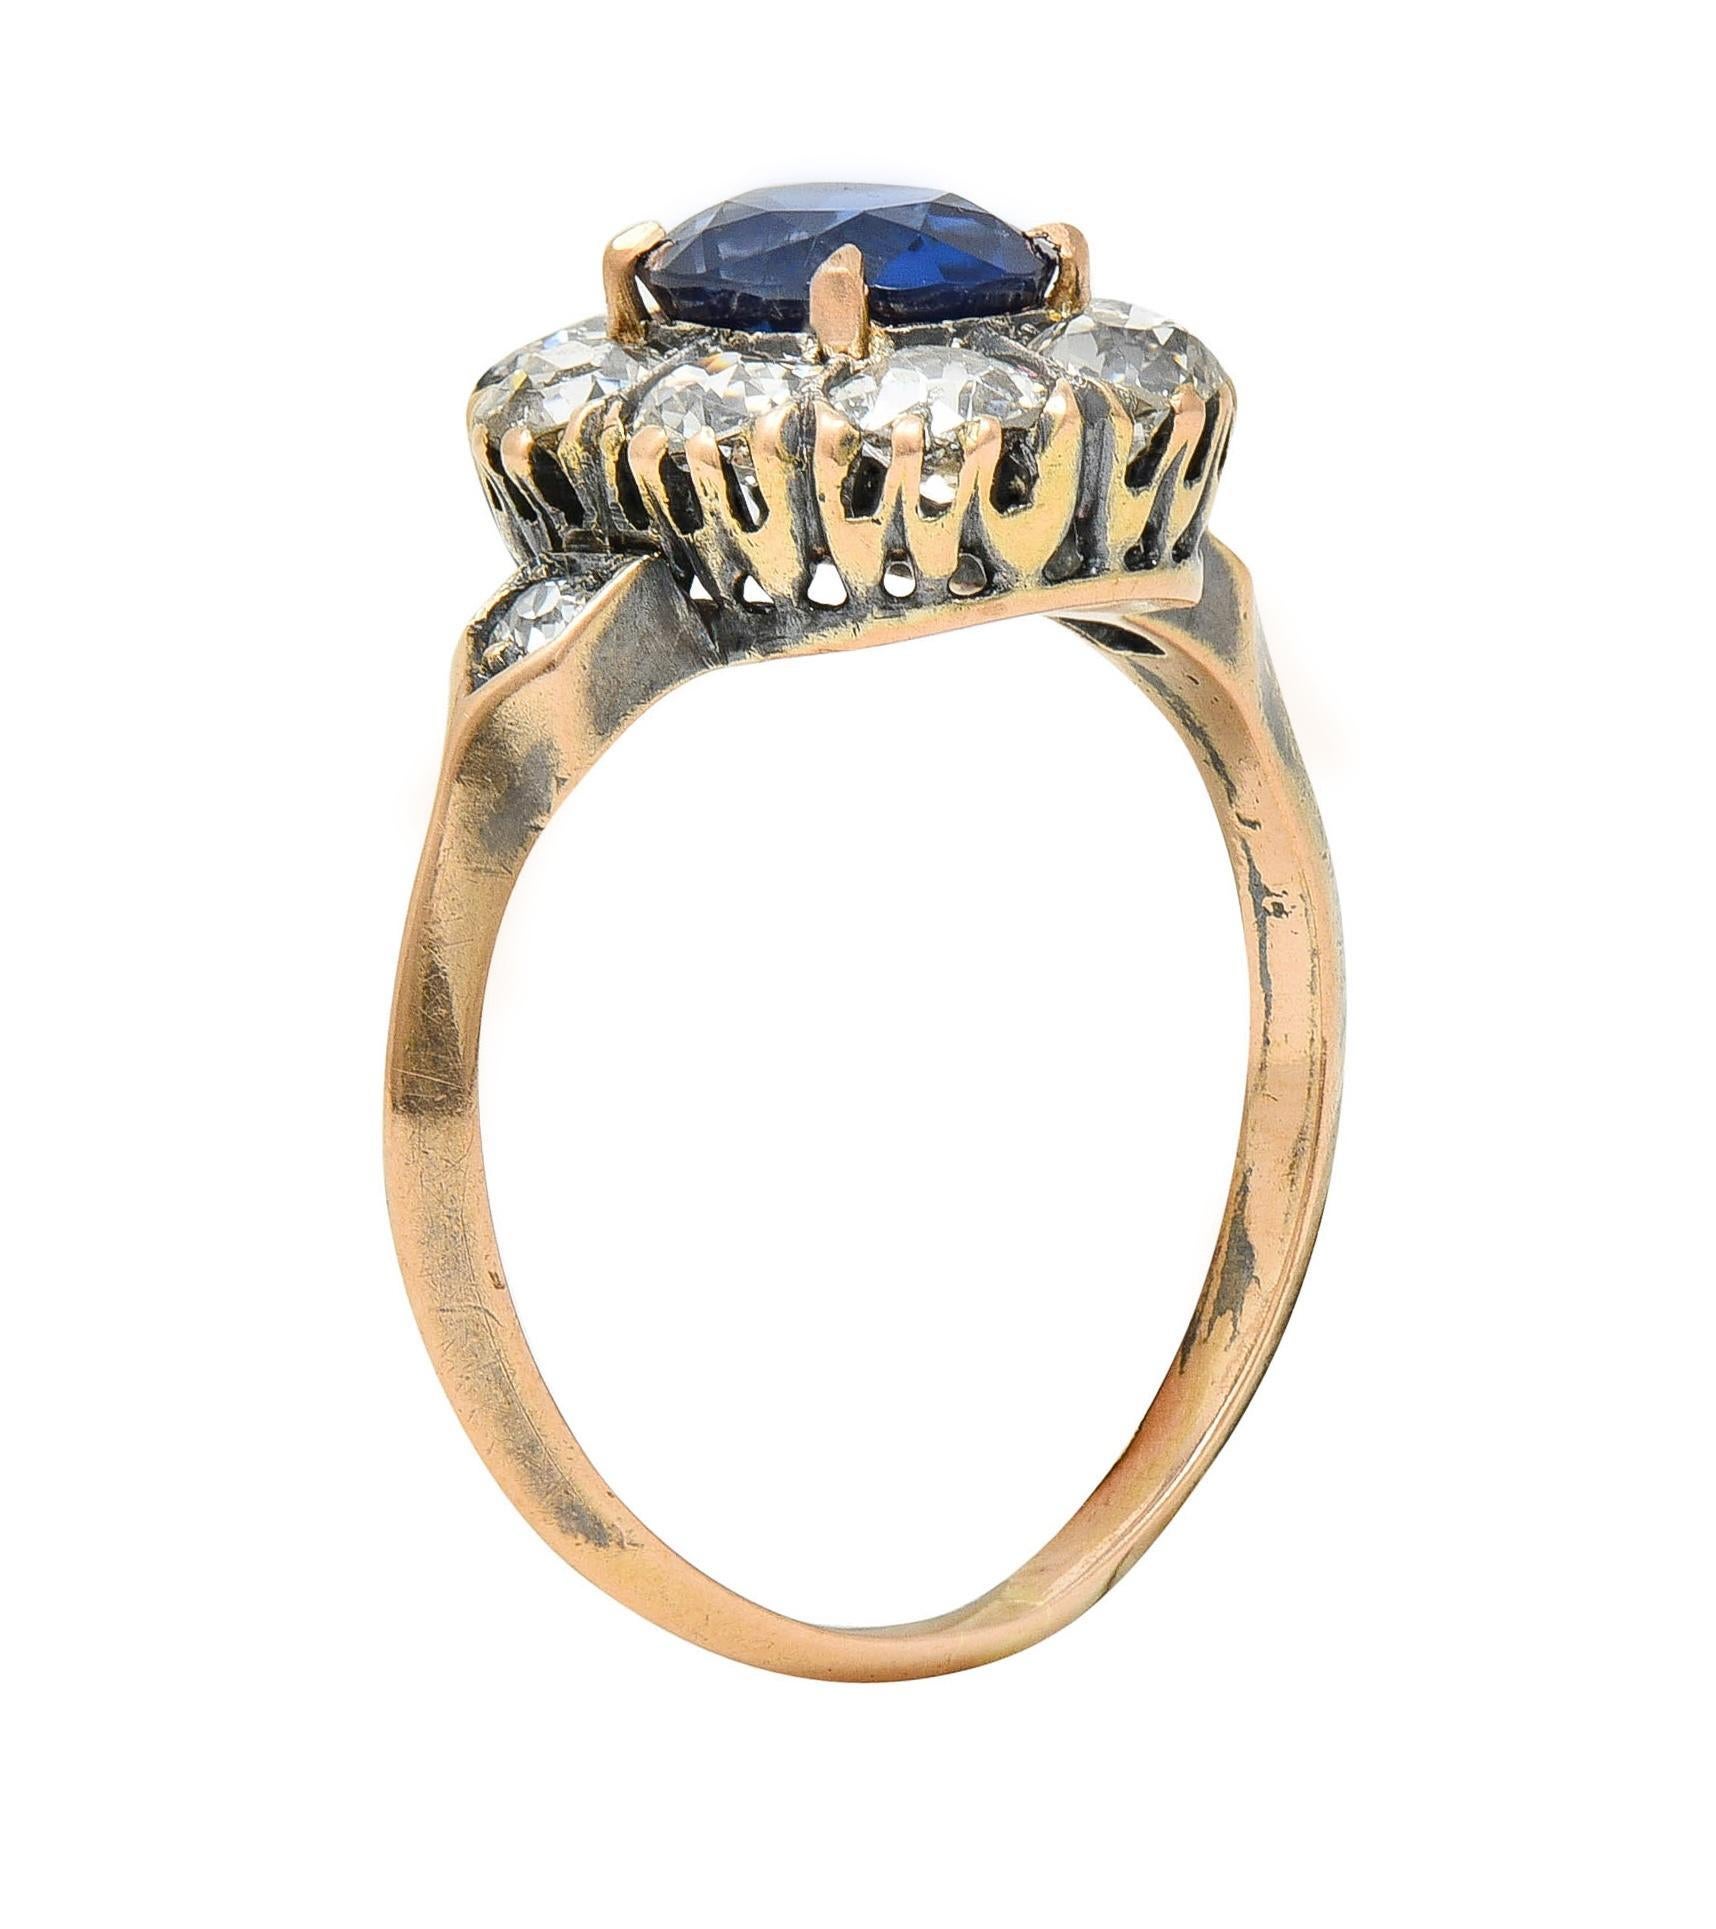 Centering a cushion-shaped sapphire weighing 1.16 carats total - transparent deep vivid blue
Natural Burmese in origin and displaying no indications of heat treatment 
Prong set with a halo surround of old mine cut diamonds 
With additional diamonds